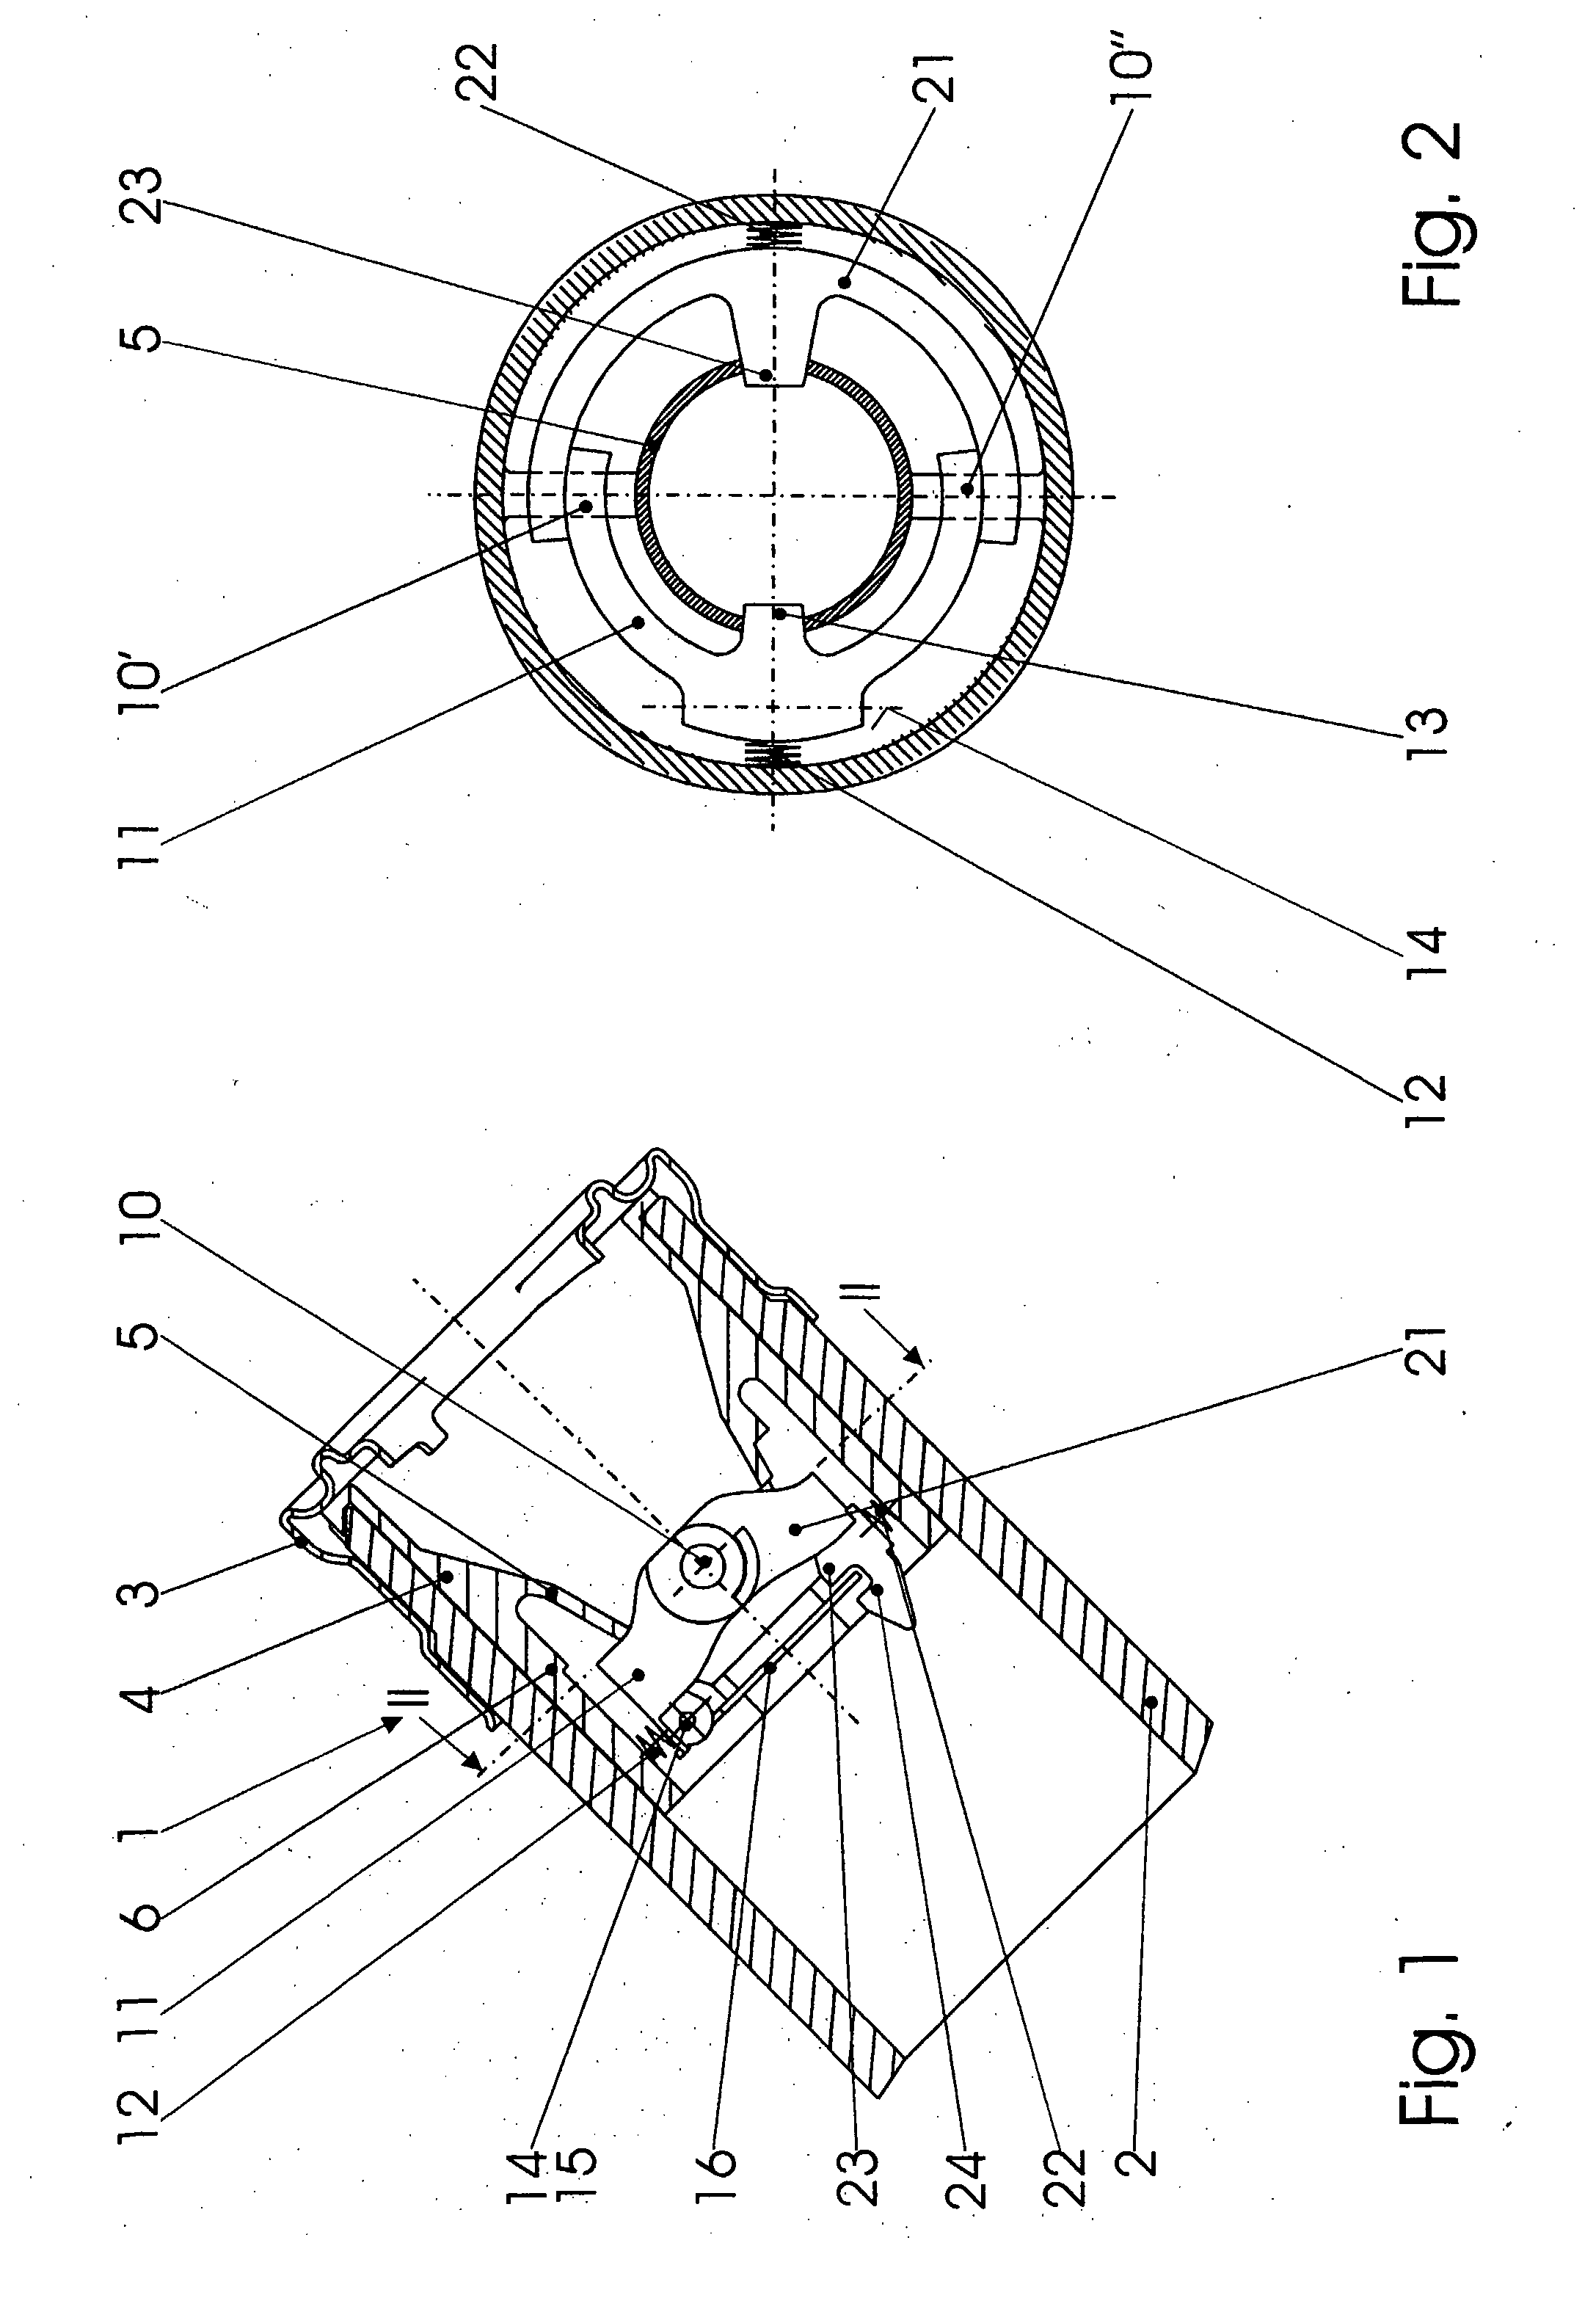 Filler Tube For The Fuel Tank Of A Motor Vehicle With Selective Opening